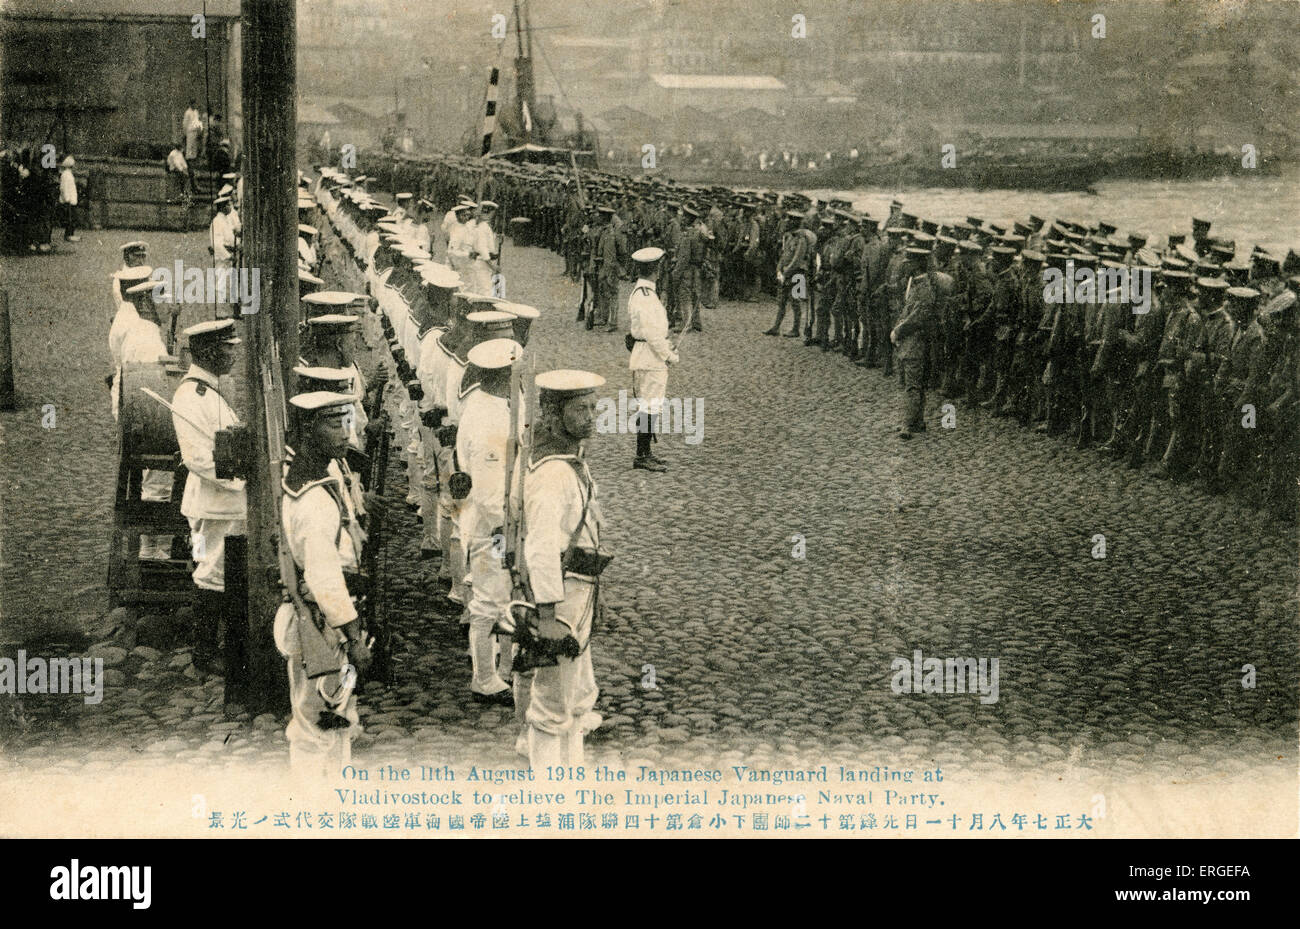 Japanese troops landing at Vladivostok, Russia, 11 August 1918. During Siberian Intervention. Dispatch of troops of the Entente powers to the Russian Maritime Provinces as part of a larger effort by the western powers and Japan to support White Russian forces against the Bolshevik Red Army during the Russian Civil War. Stock Photo